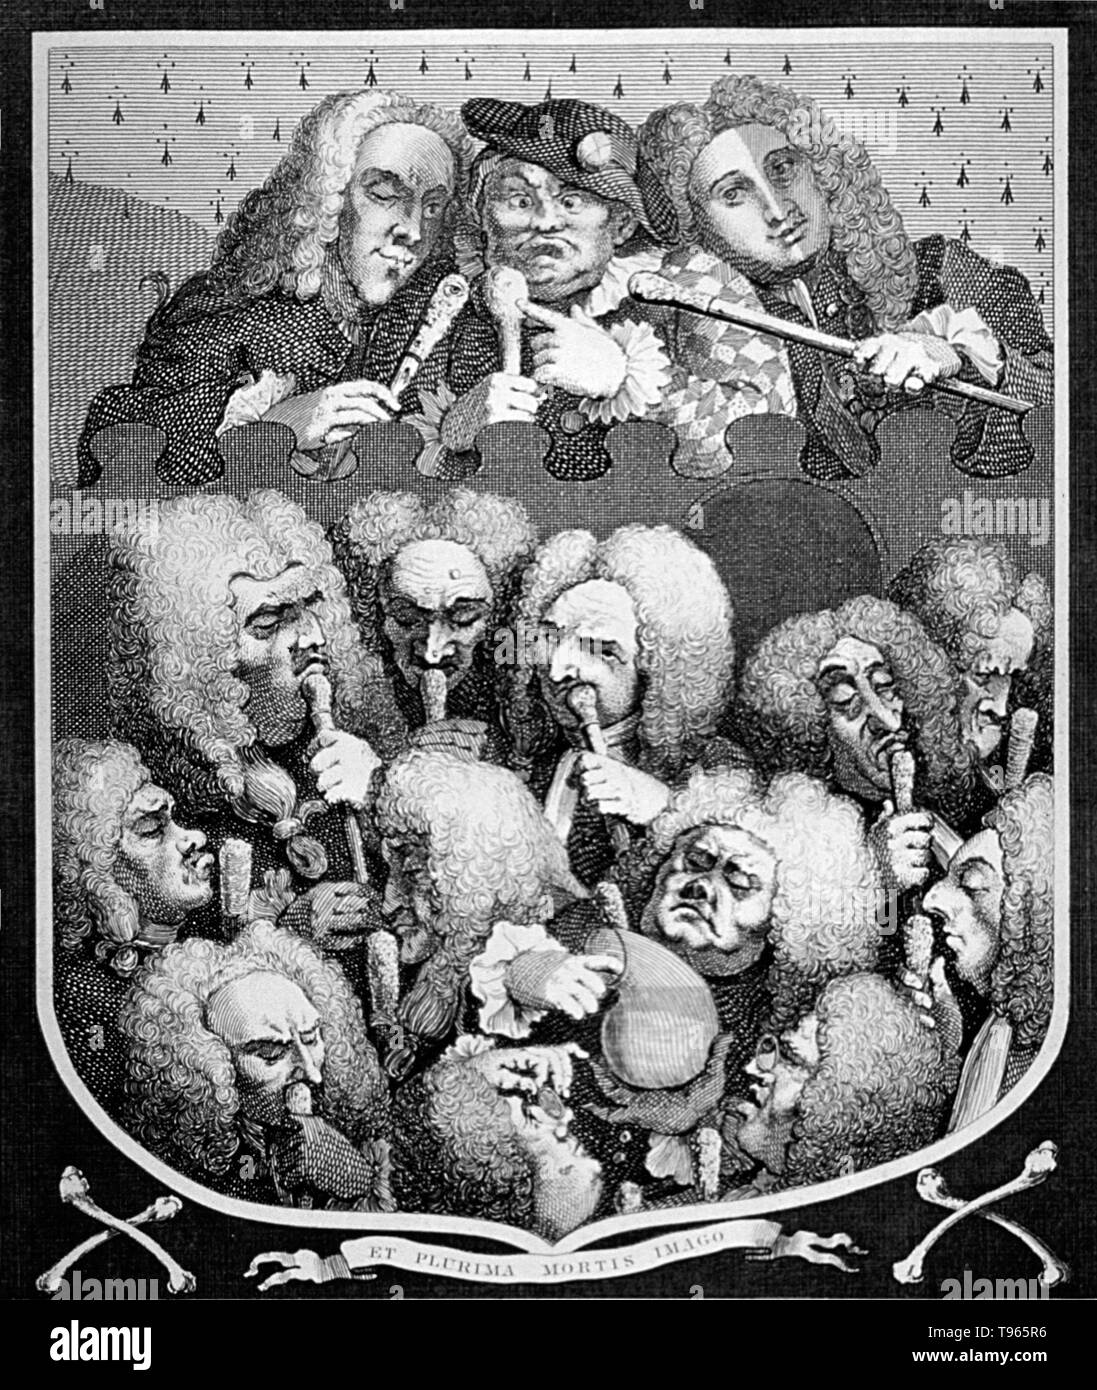 'A Consultation of Physicians, or The Company of Undertakers' by William Hogarth depicts three well-known quacks with a group of twelve portly physicians. The three quacks at the top of the print are Joshua Ward, perhaps the most famous charlatan of his time; Sarah Mapp, a well-known bonesetter; and John Taylor, an oculist. The bewigged physicians dispel the stench of death by sniffing the pomander attached to the top of their canes. Stock Photo